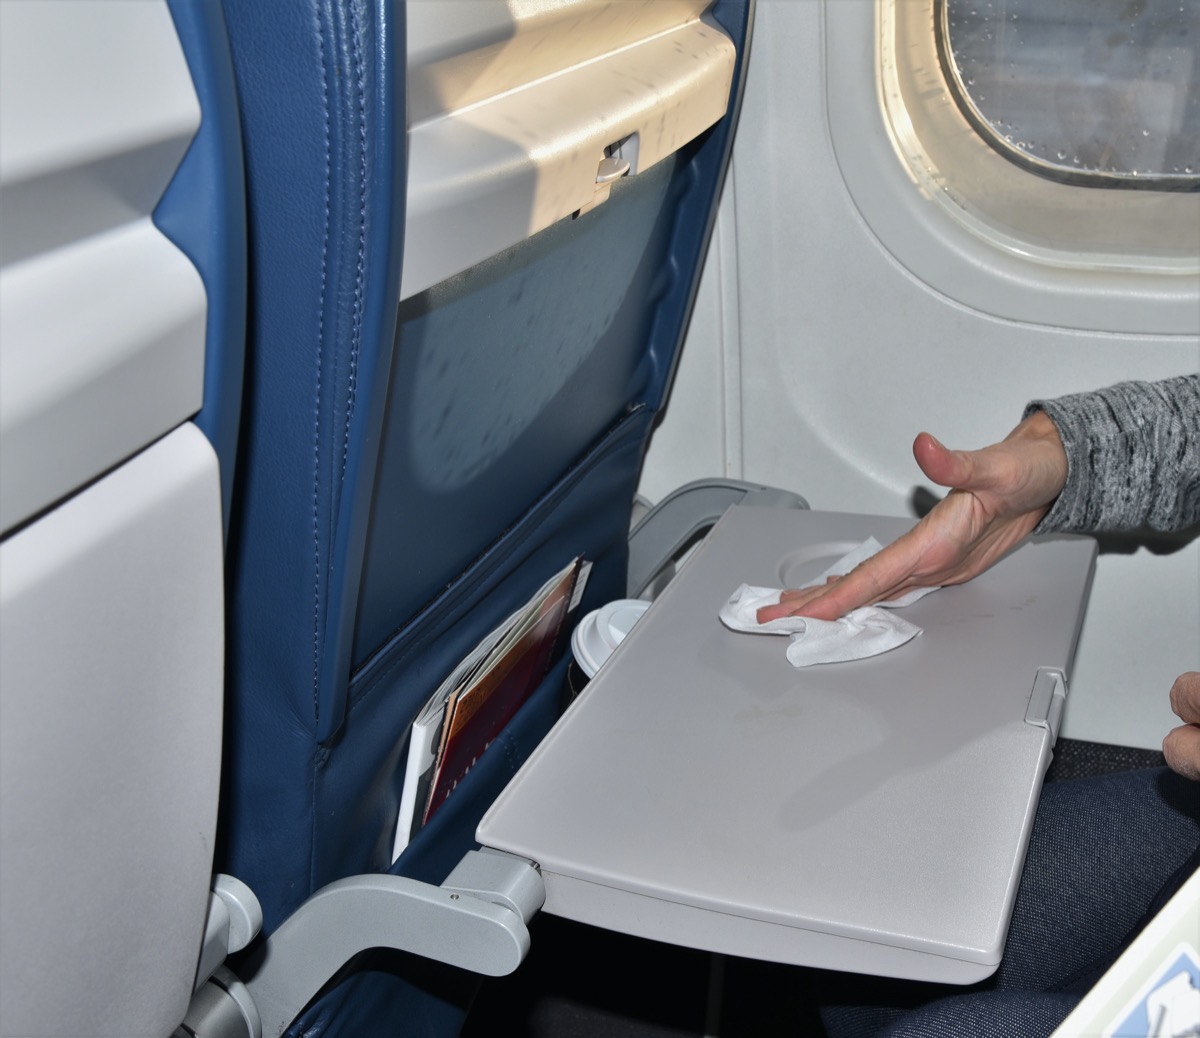 A woman sitting by a window seat is wiping down a germ laden dirty airplane tray with an antibacterial wipe